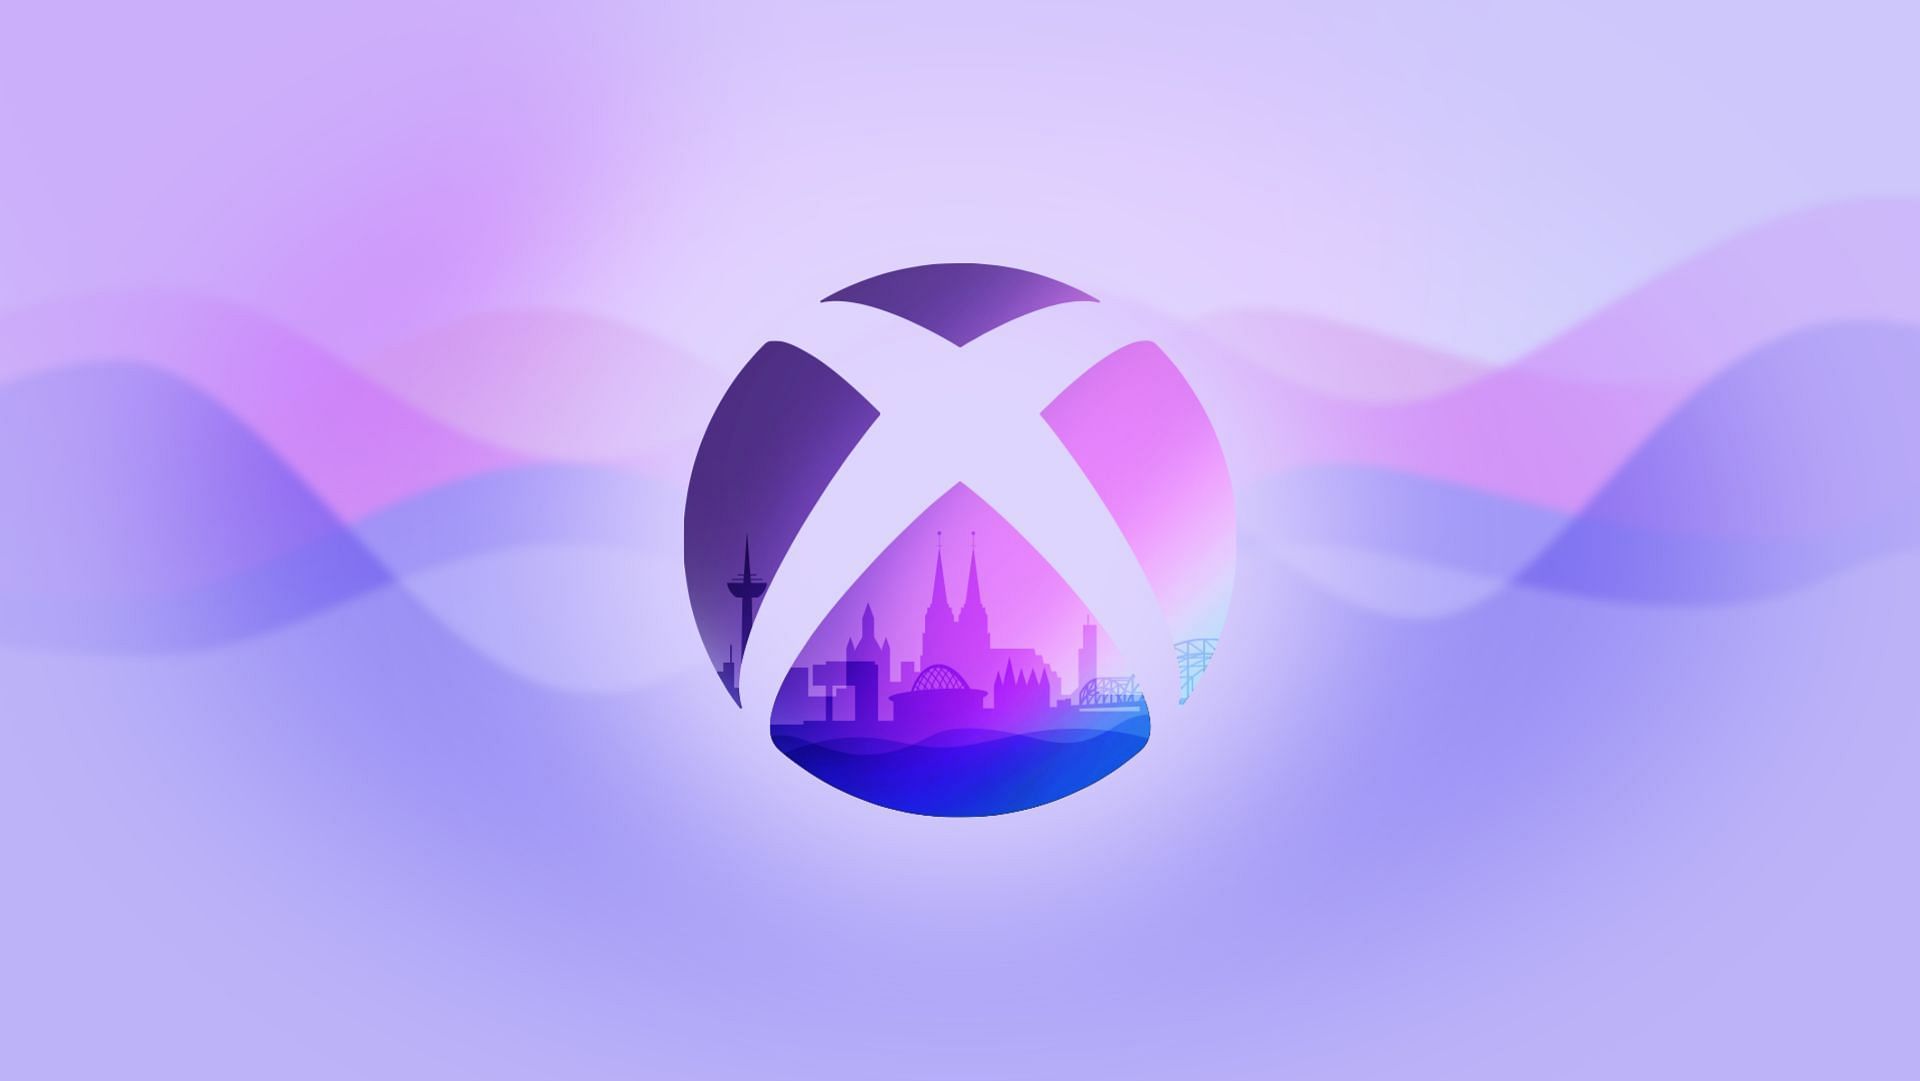 Xbox is gearing up with some of its highly anticipated titles for the upcoming Gamescom 2022 (Image via Xbox)